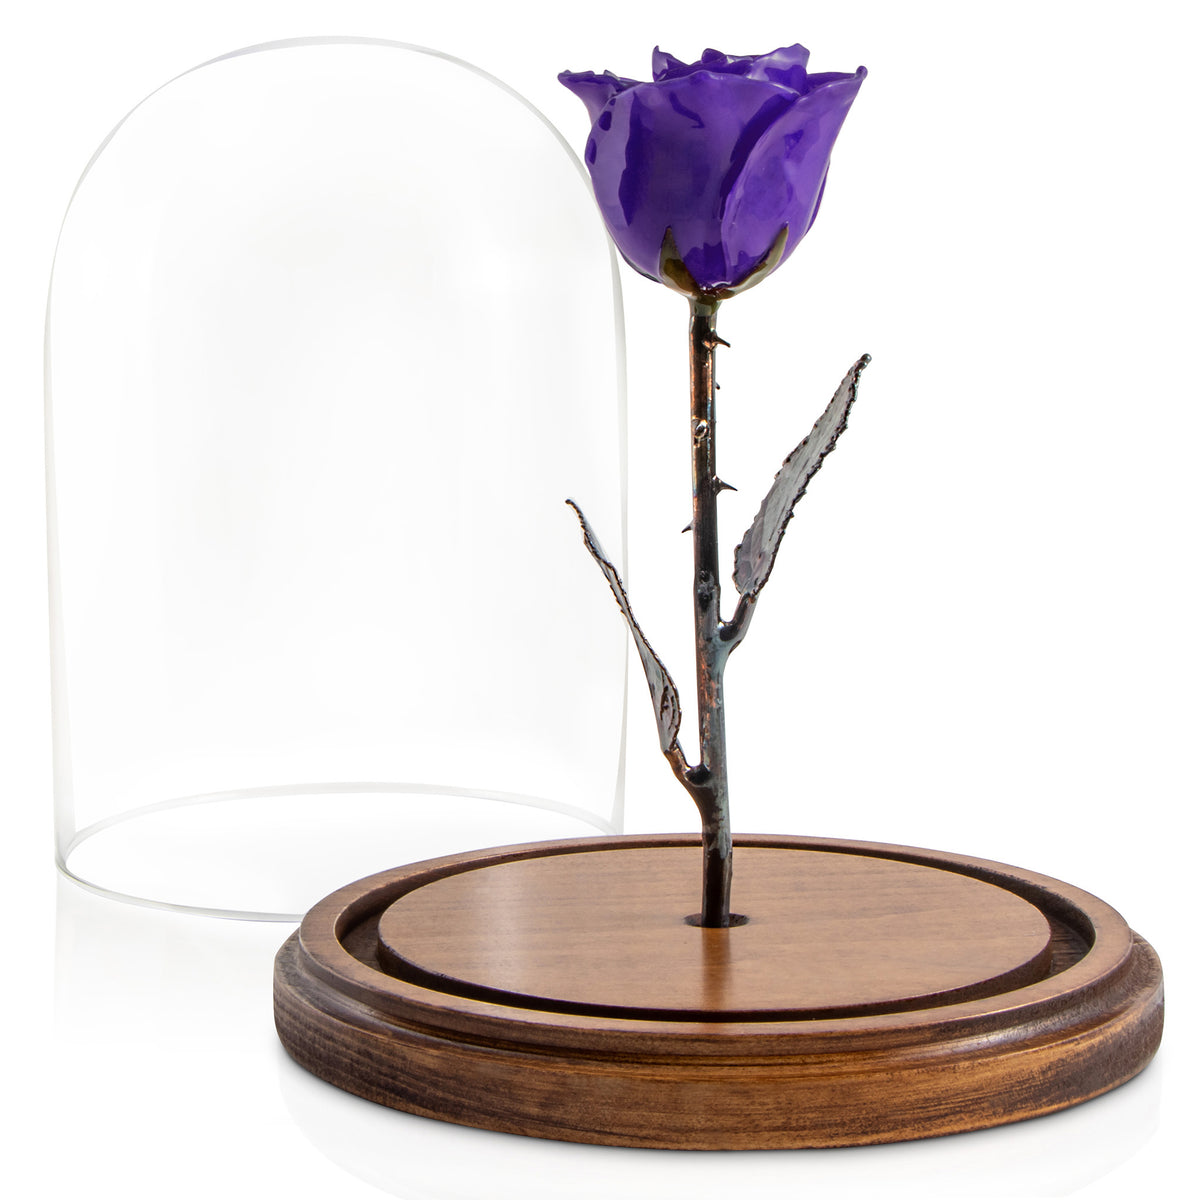 Purple Enchanted Rose (aka Beauty &amp; The Beast Rose) with Patina Copper Stem Mounted to A Hand Turned Solid Wood Base under a glass dome. View with dome off.